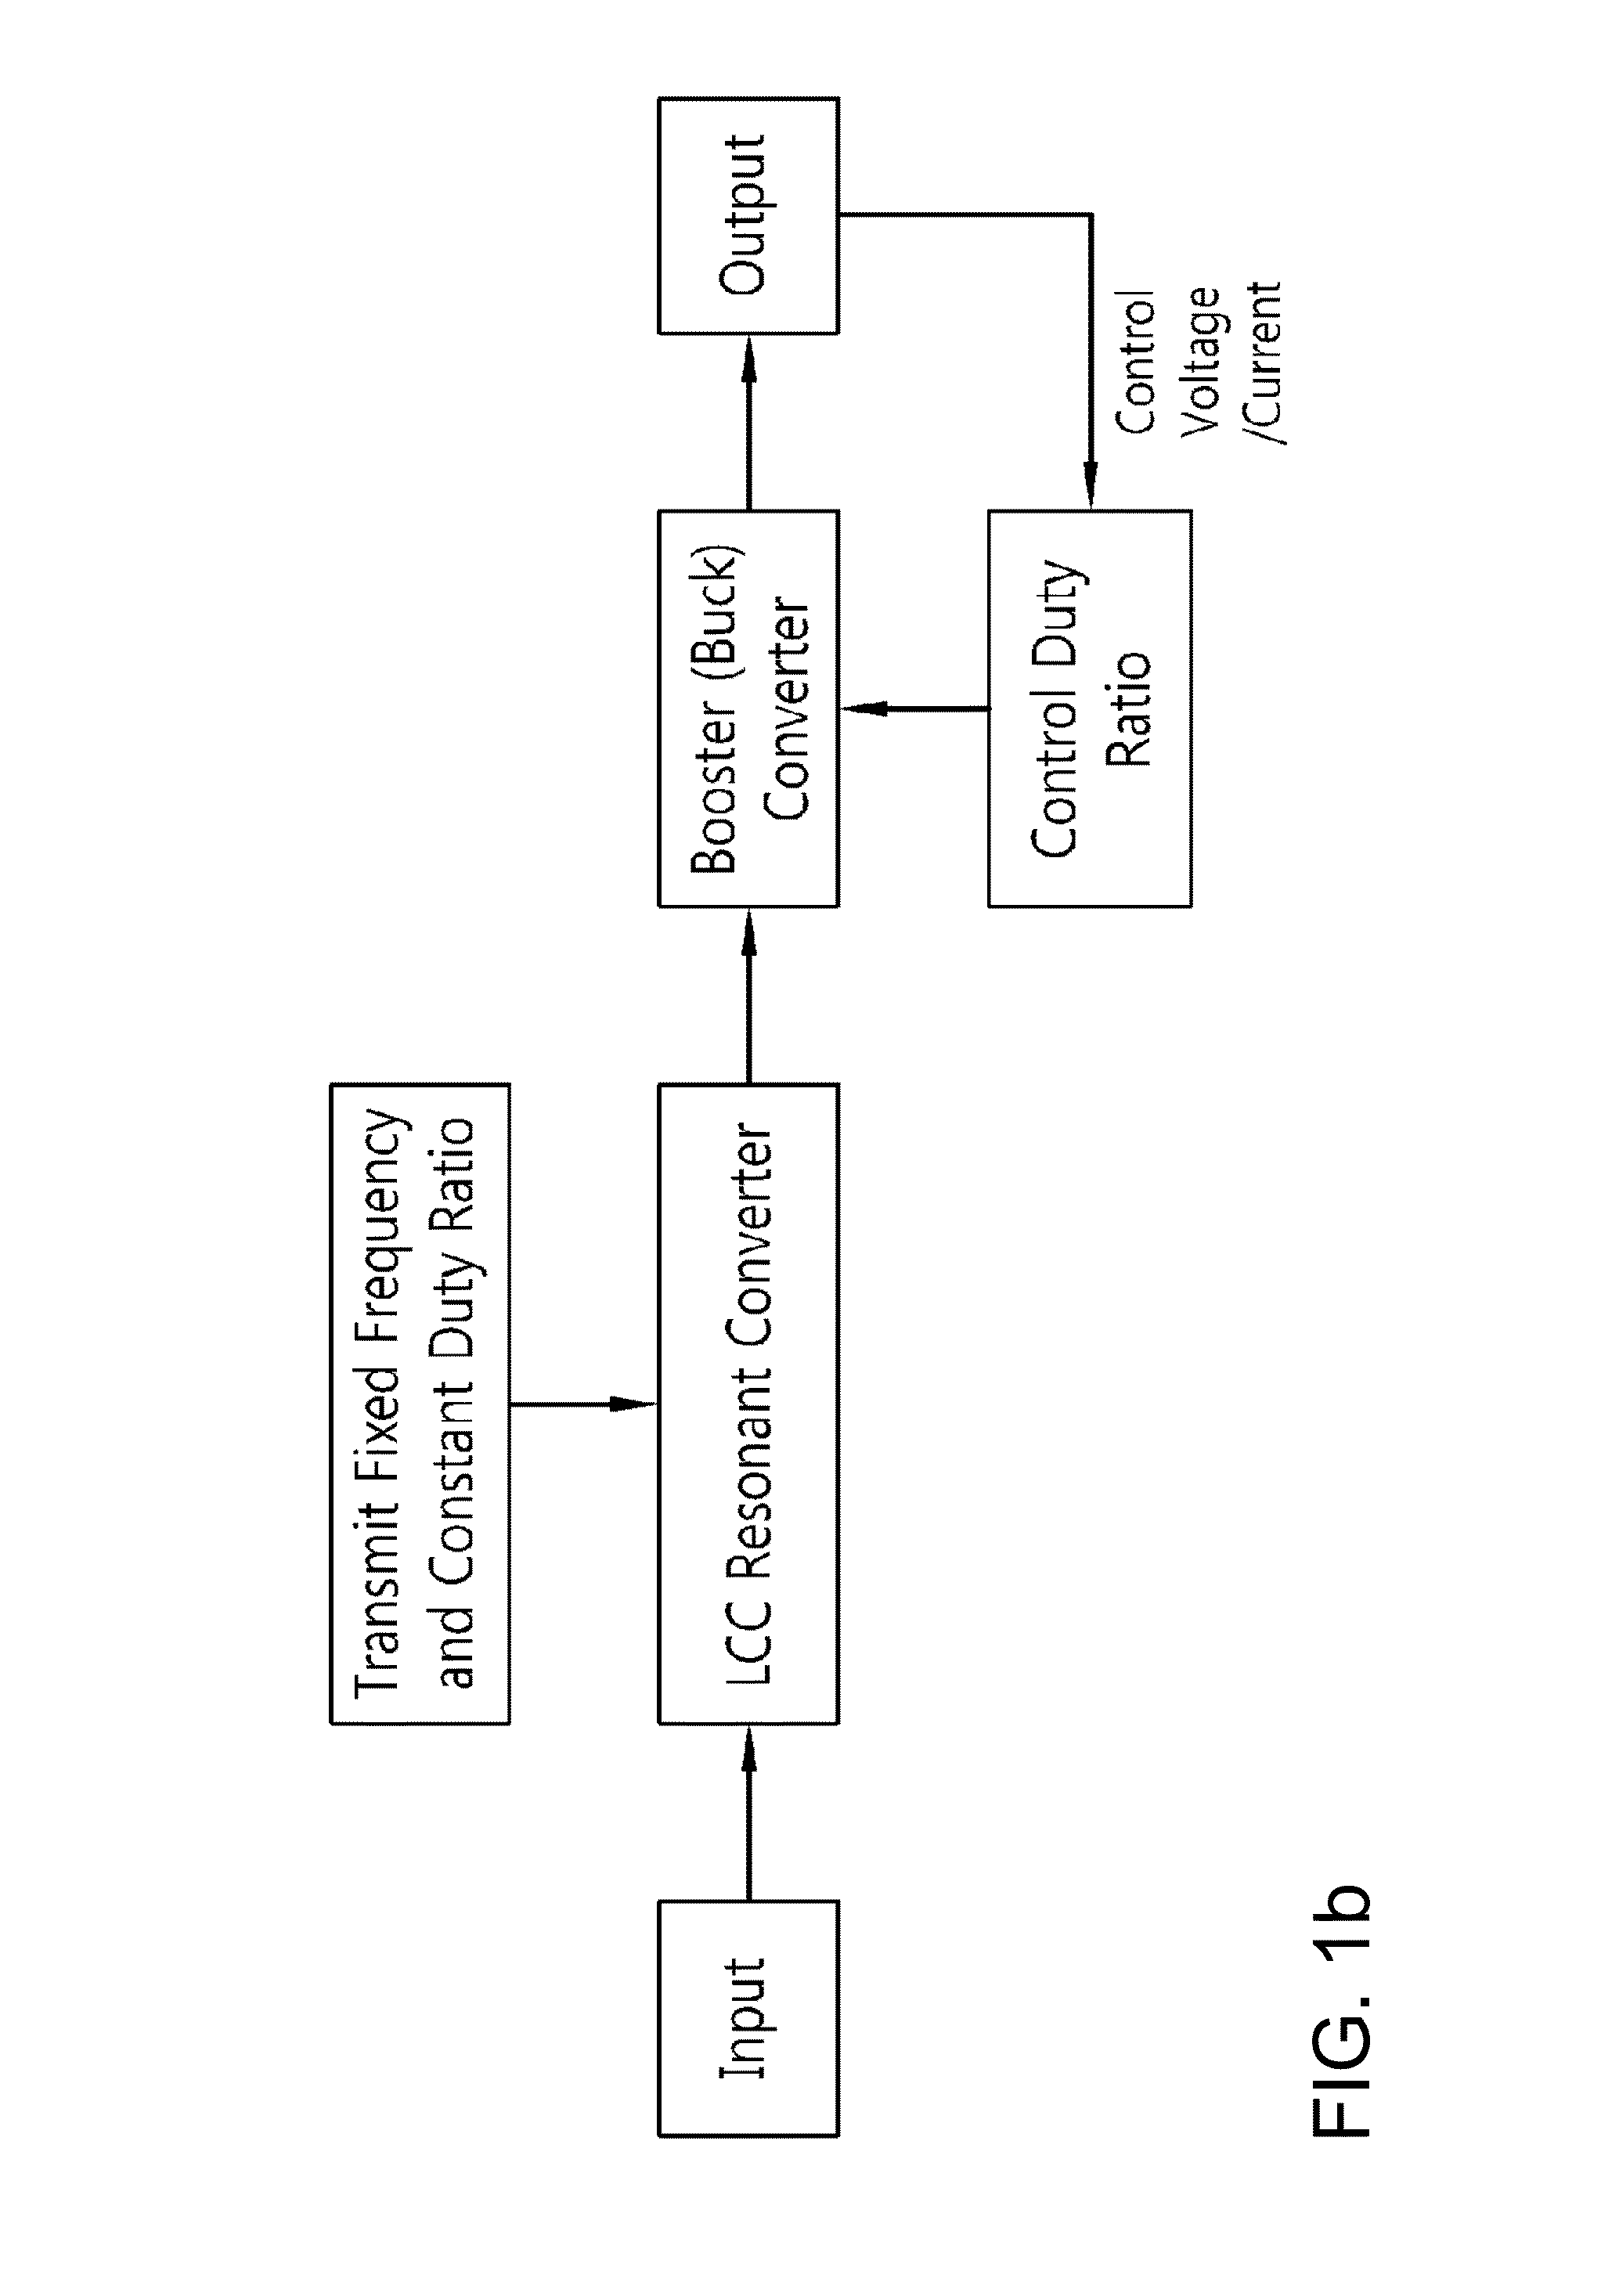 Two-stage insulated bidirectional DC/DC power converter using a constant duty ratio LLC resonant converter